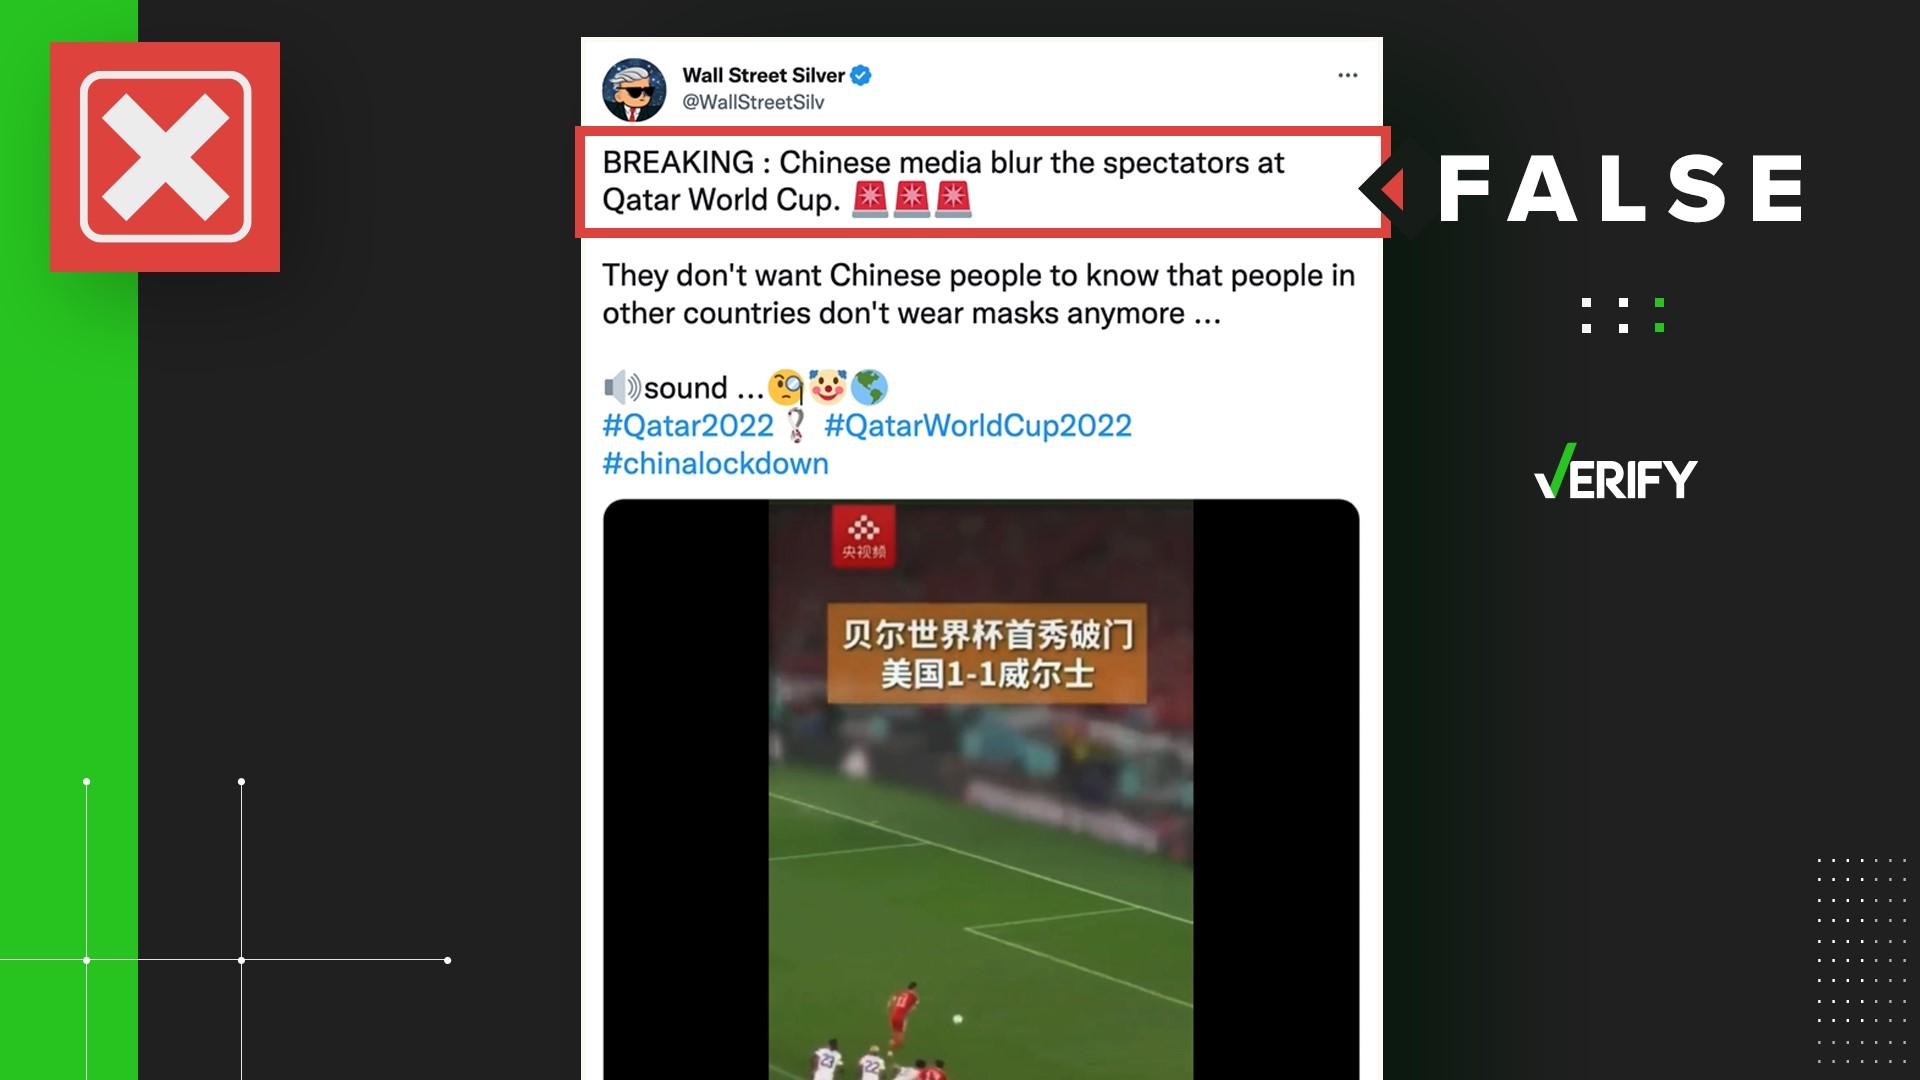 Tweets suggest Chinese state media has been blurring their footage of World Cup fans as a form of censorship. That’s not true.